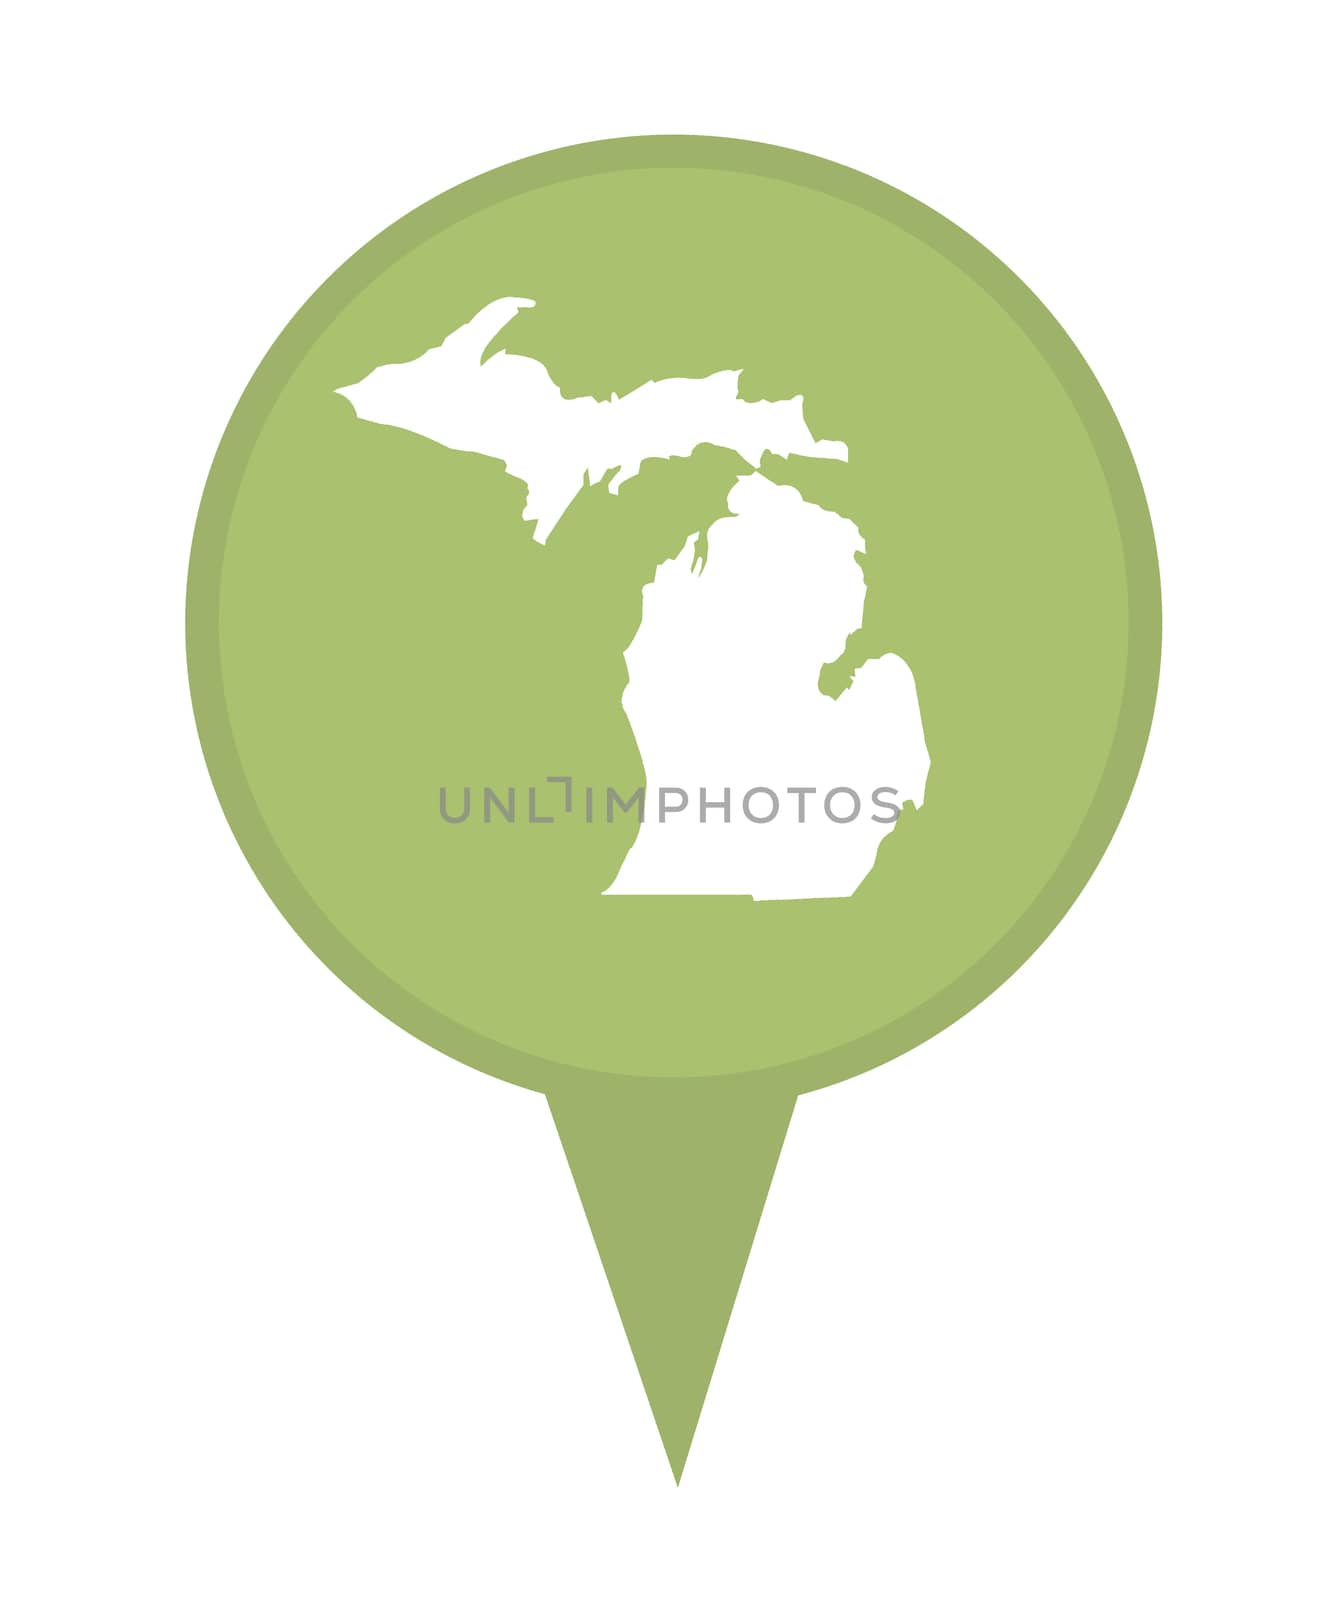 American state of Michigan marker pin isolated on a white background.